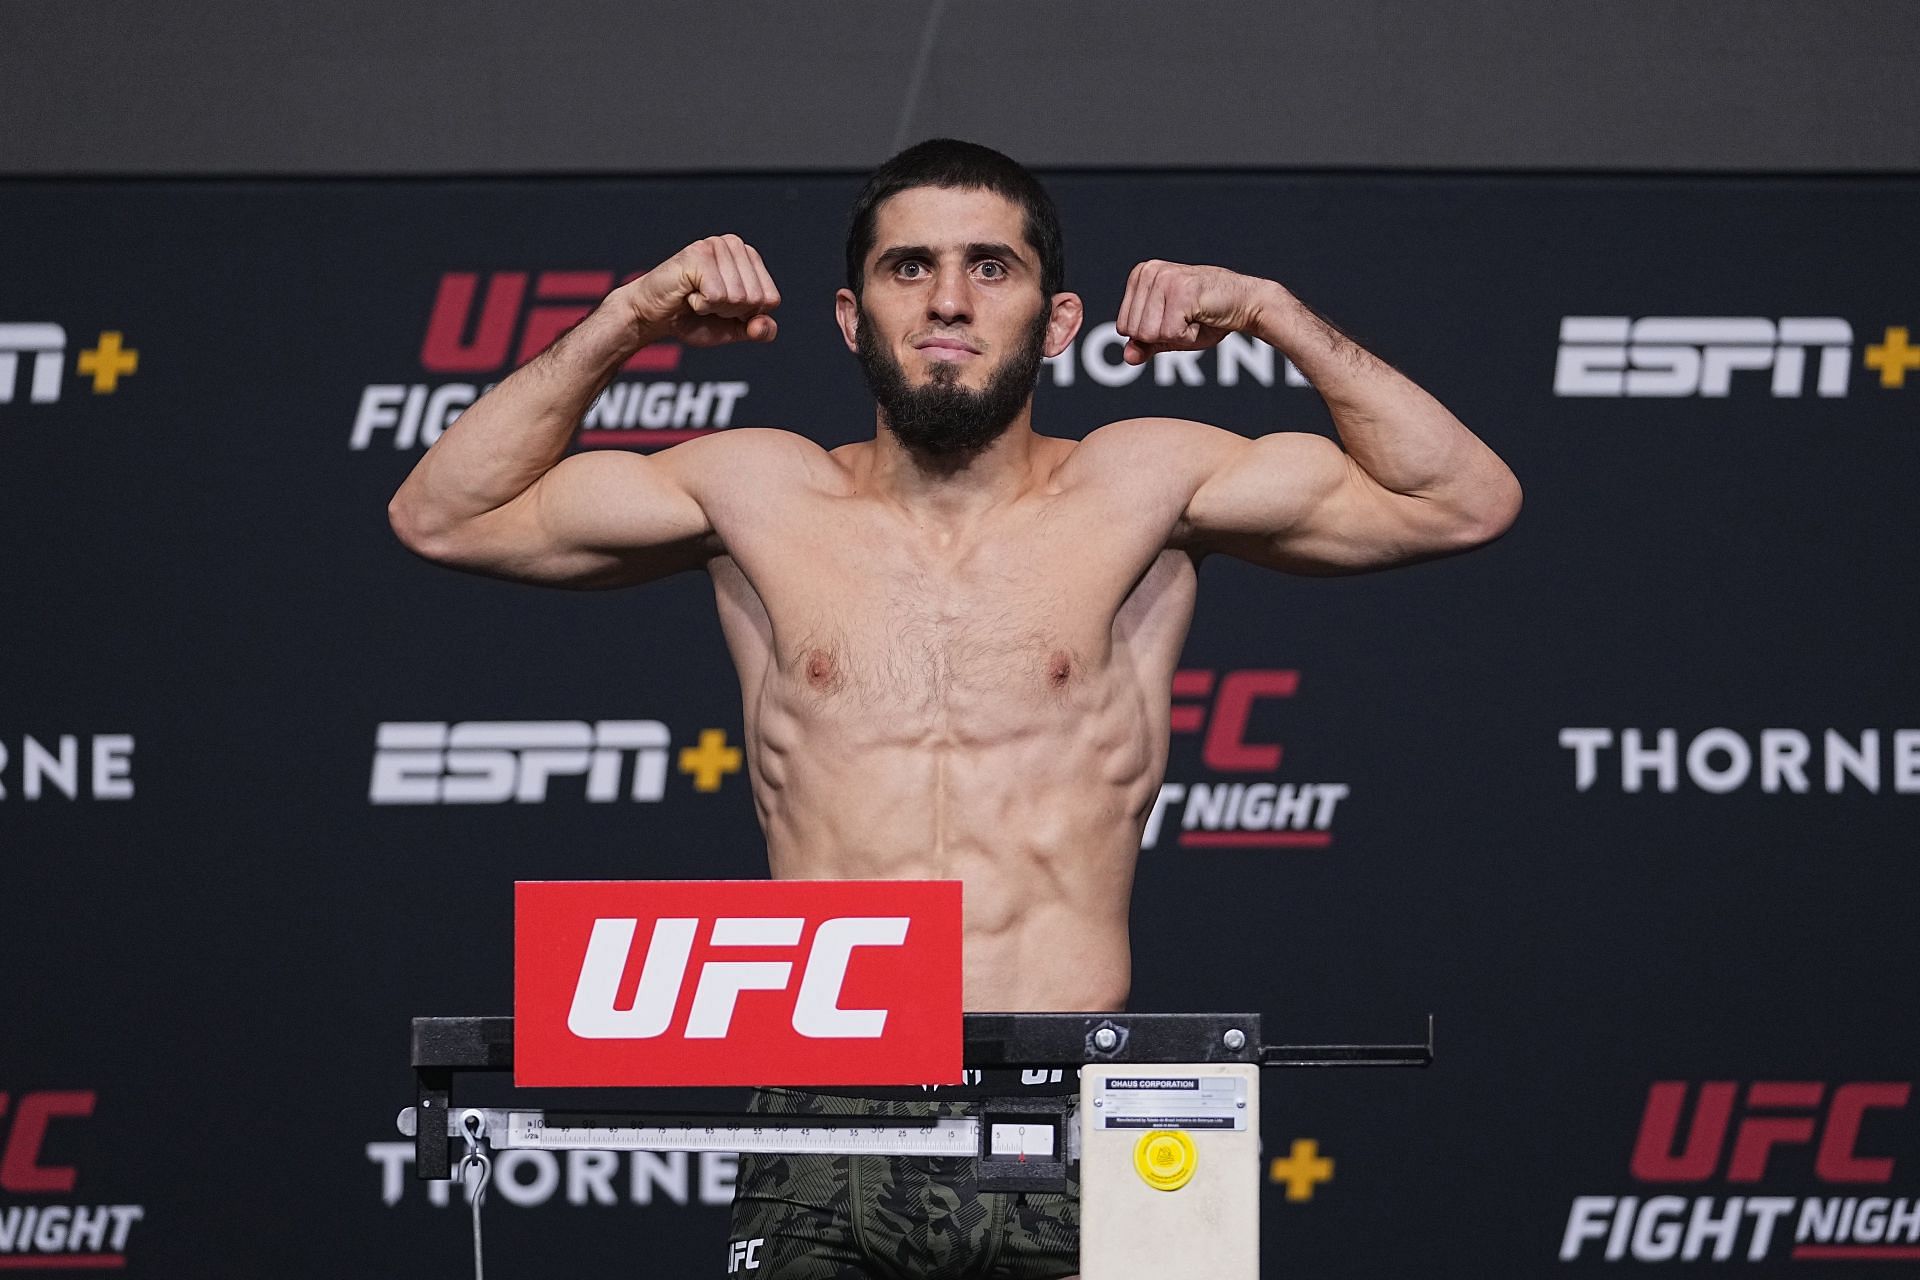 Islam Makhachev holds a record of 22-1